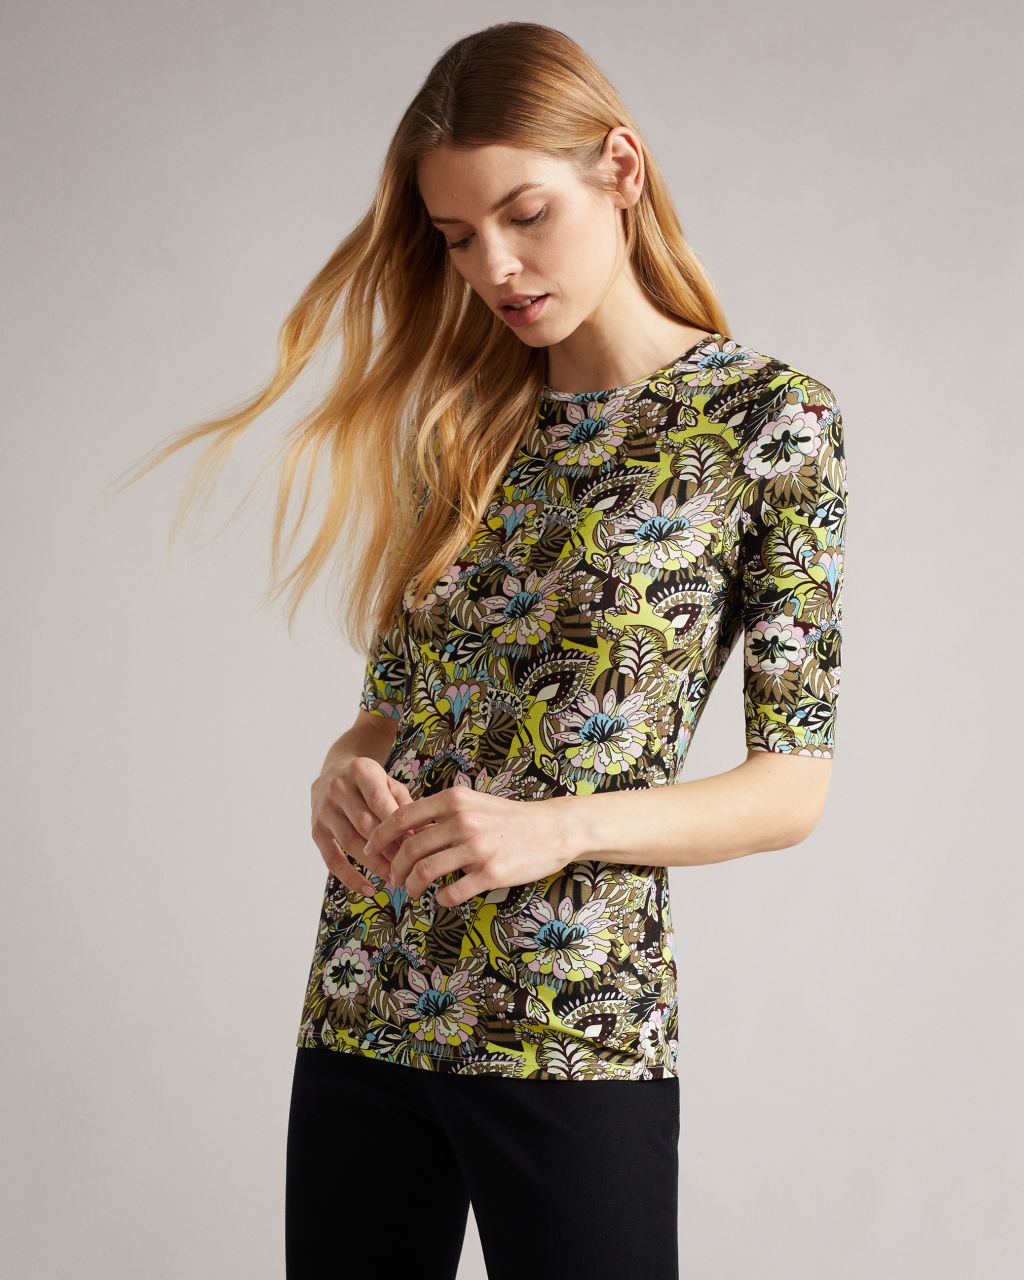 Ted Baker Women's High Neck Printed Top in Bright Green, Adria